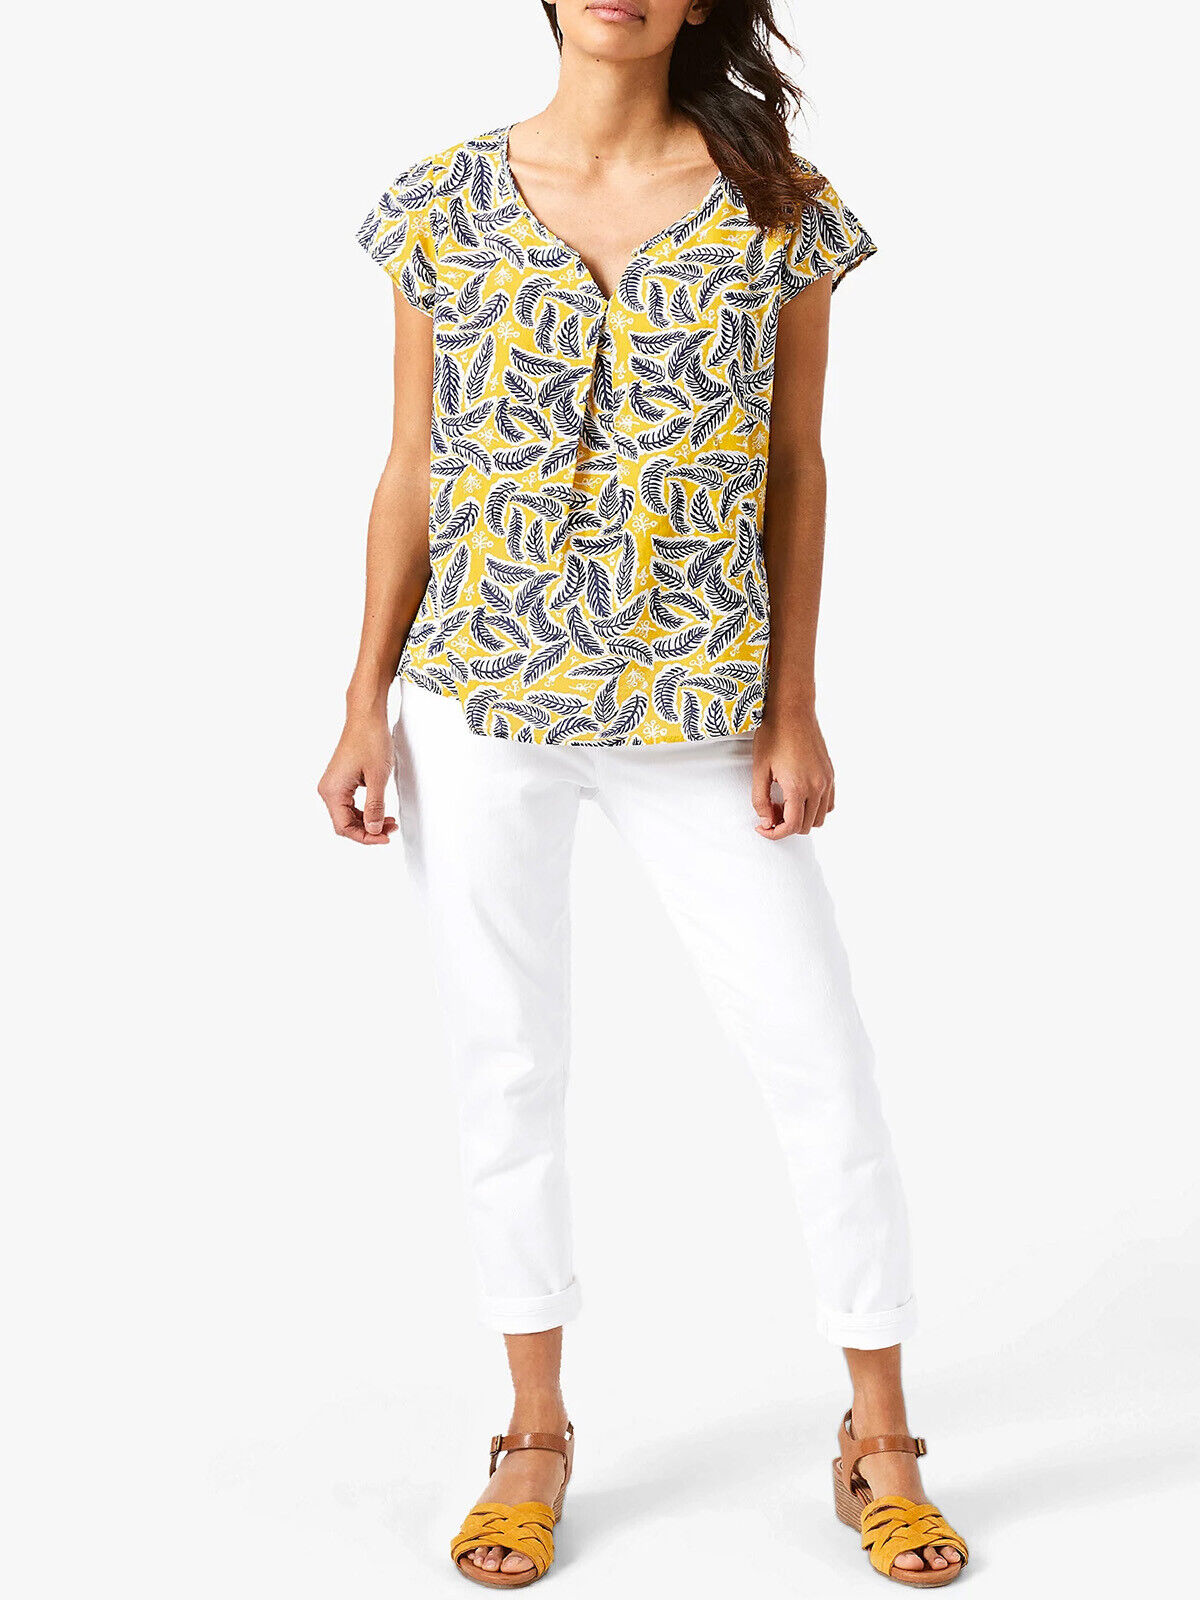 EX White Stuff Yellow Camelia Pure Cotton Printed Top in Size 10 RRP £32